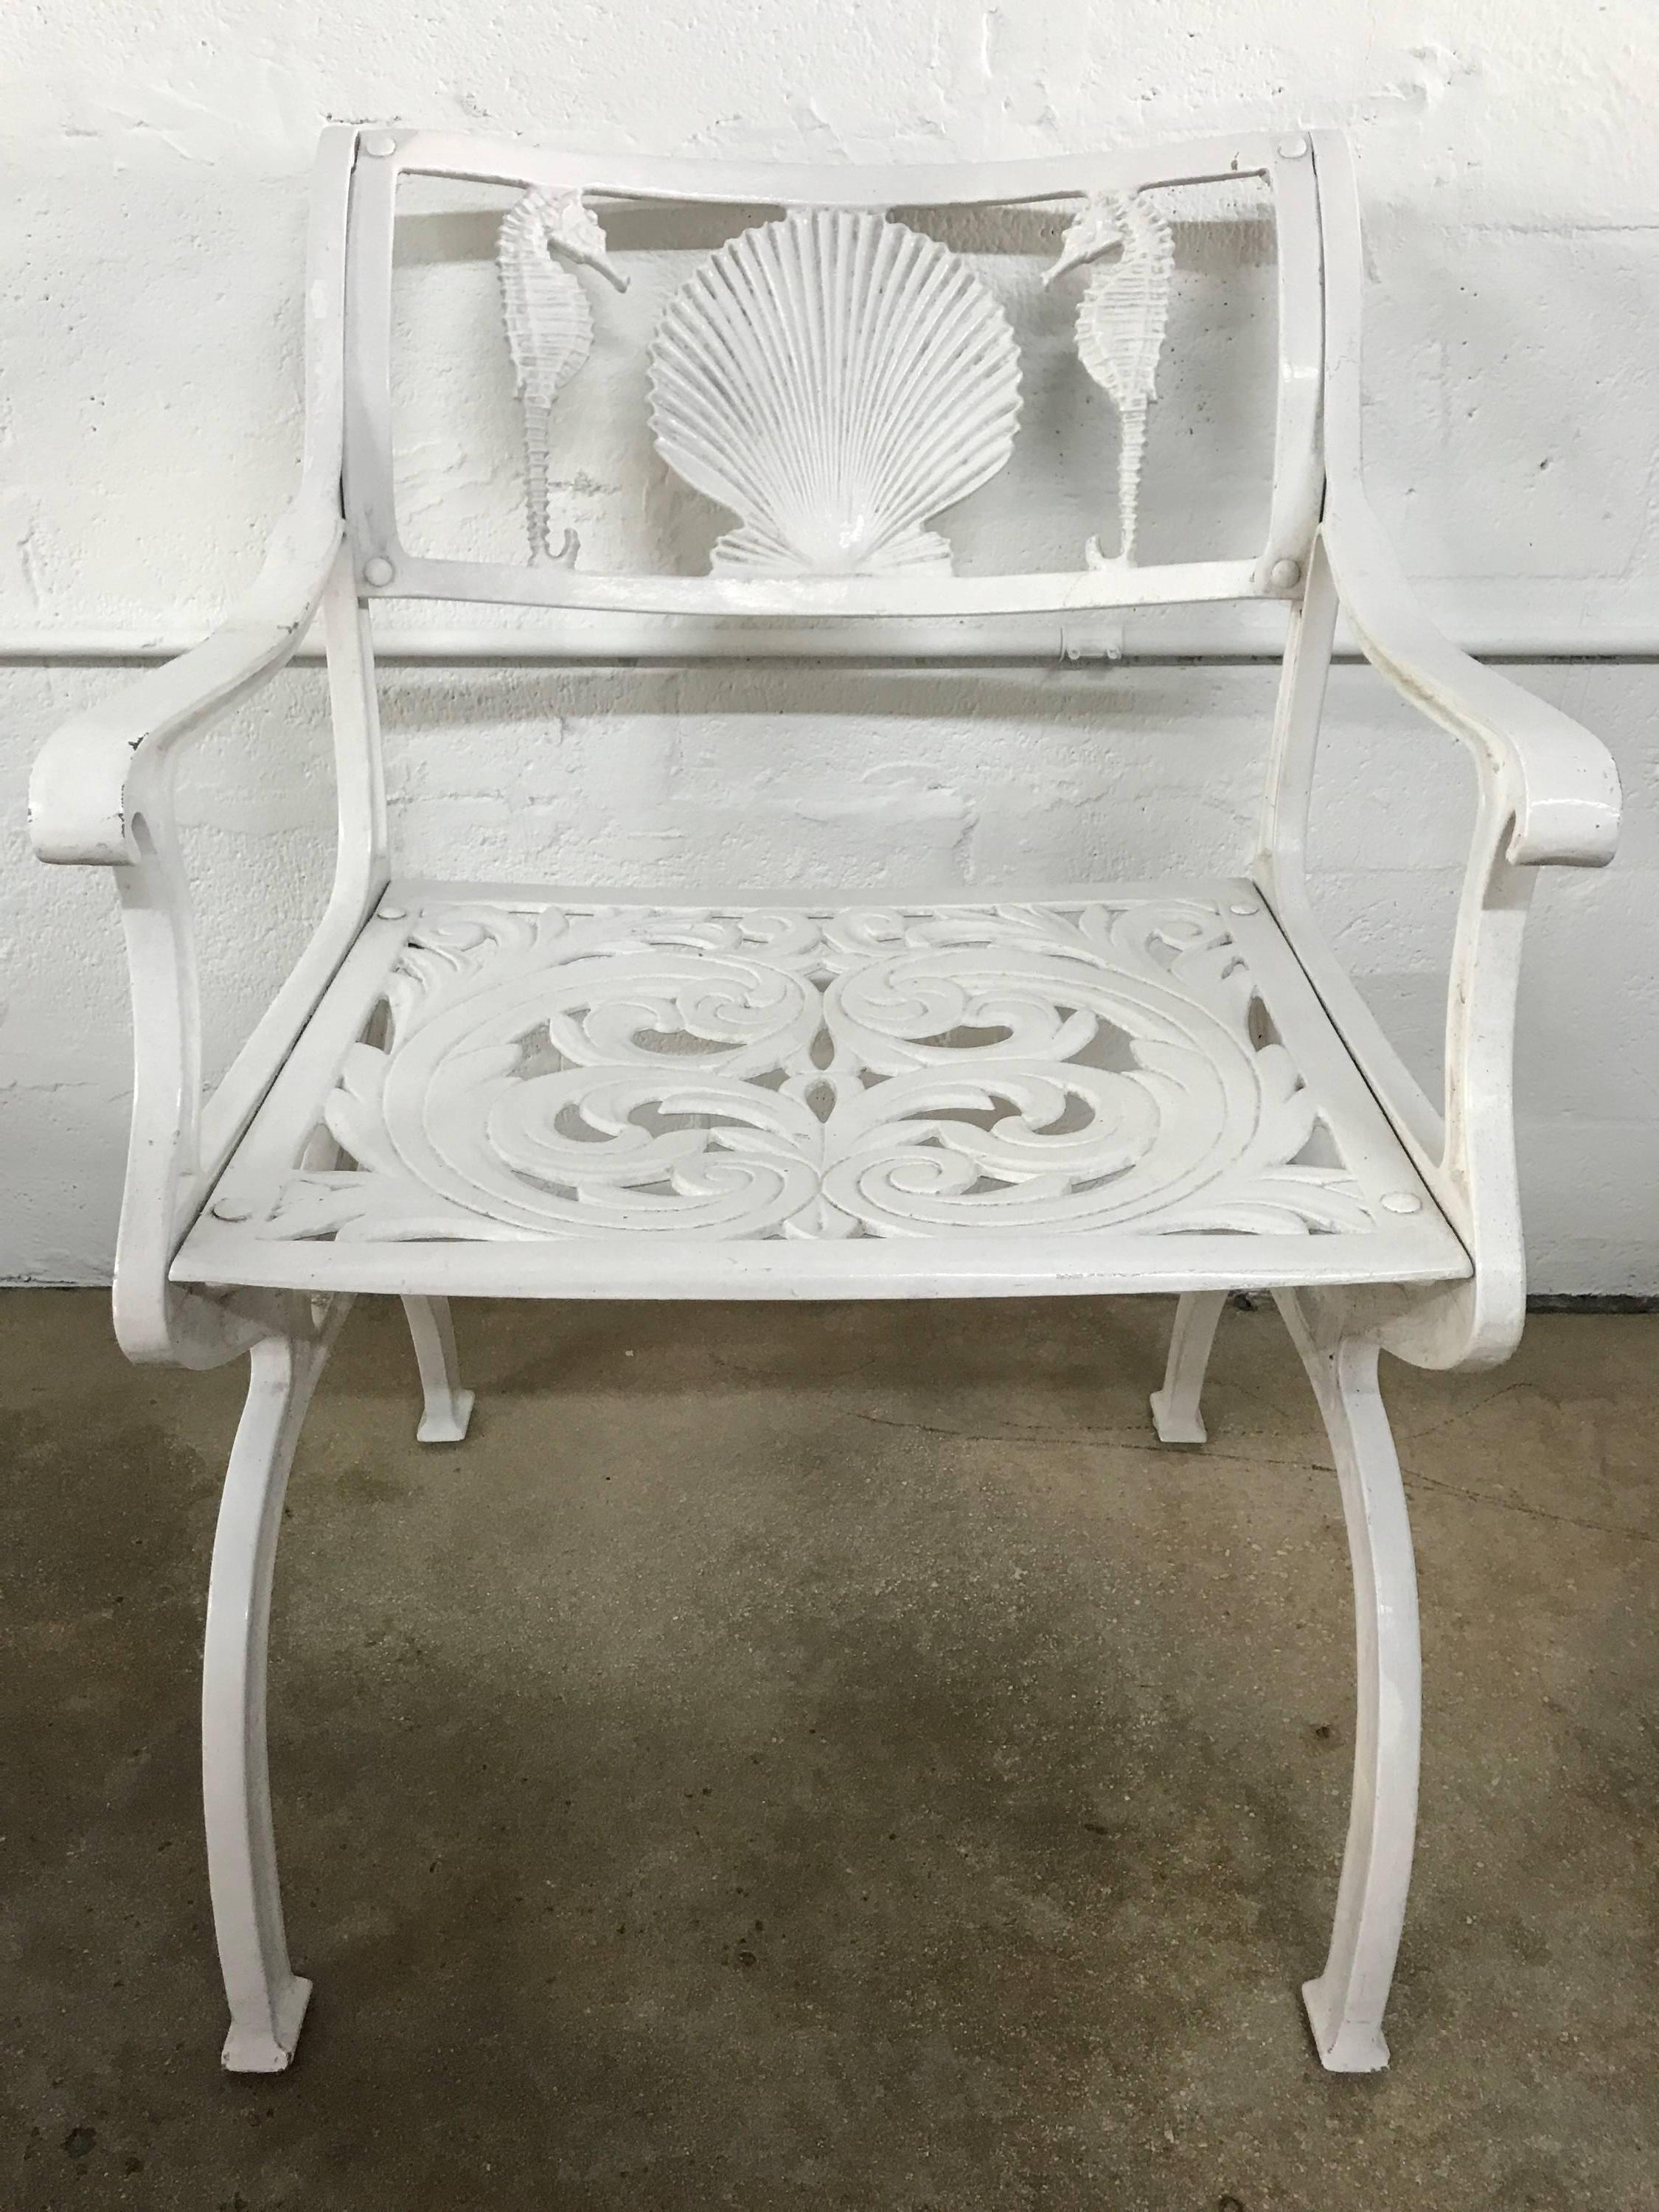 Three Molla chairs featuring a shell and seahorse motif back and filigree seat in original white powder coated aluminum.